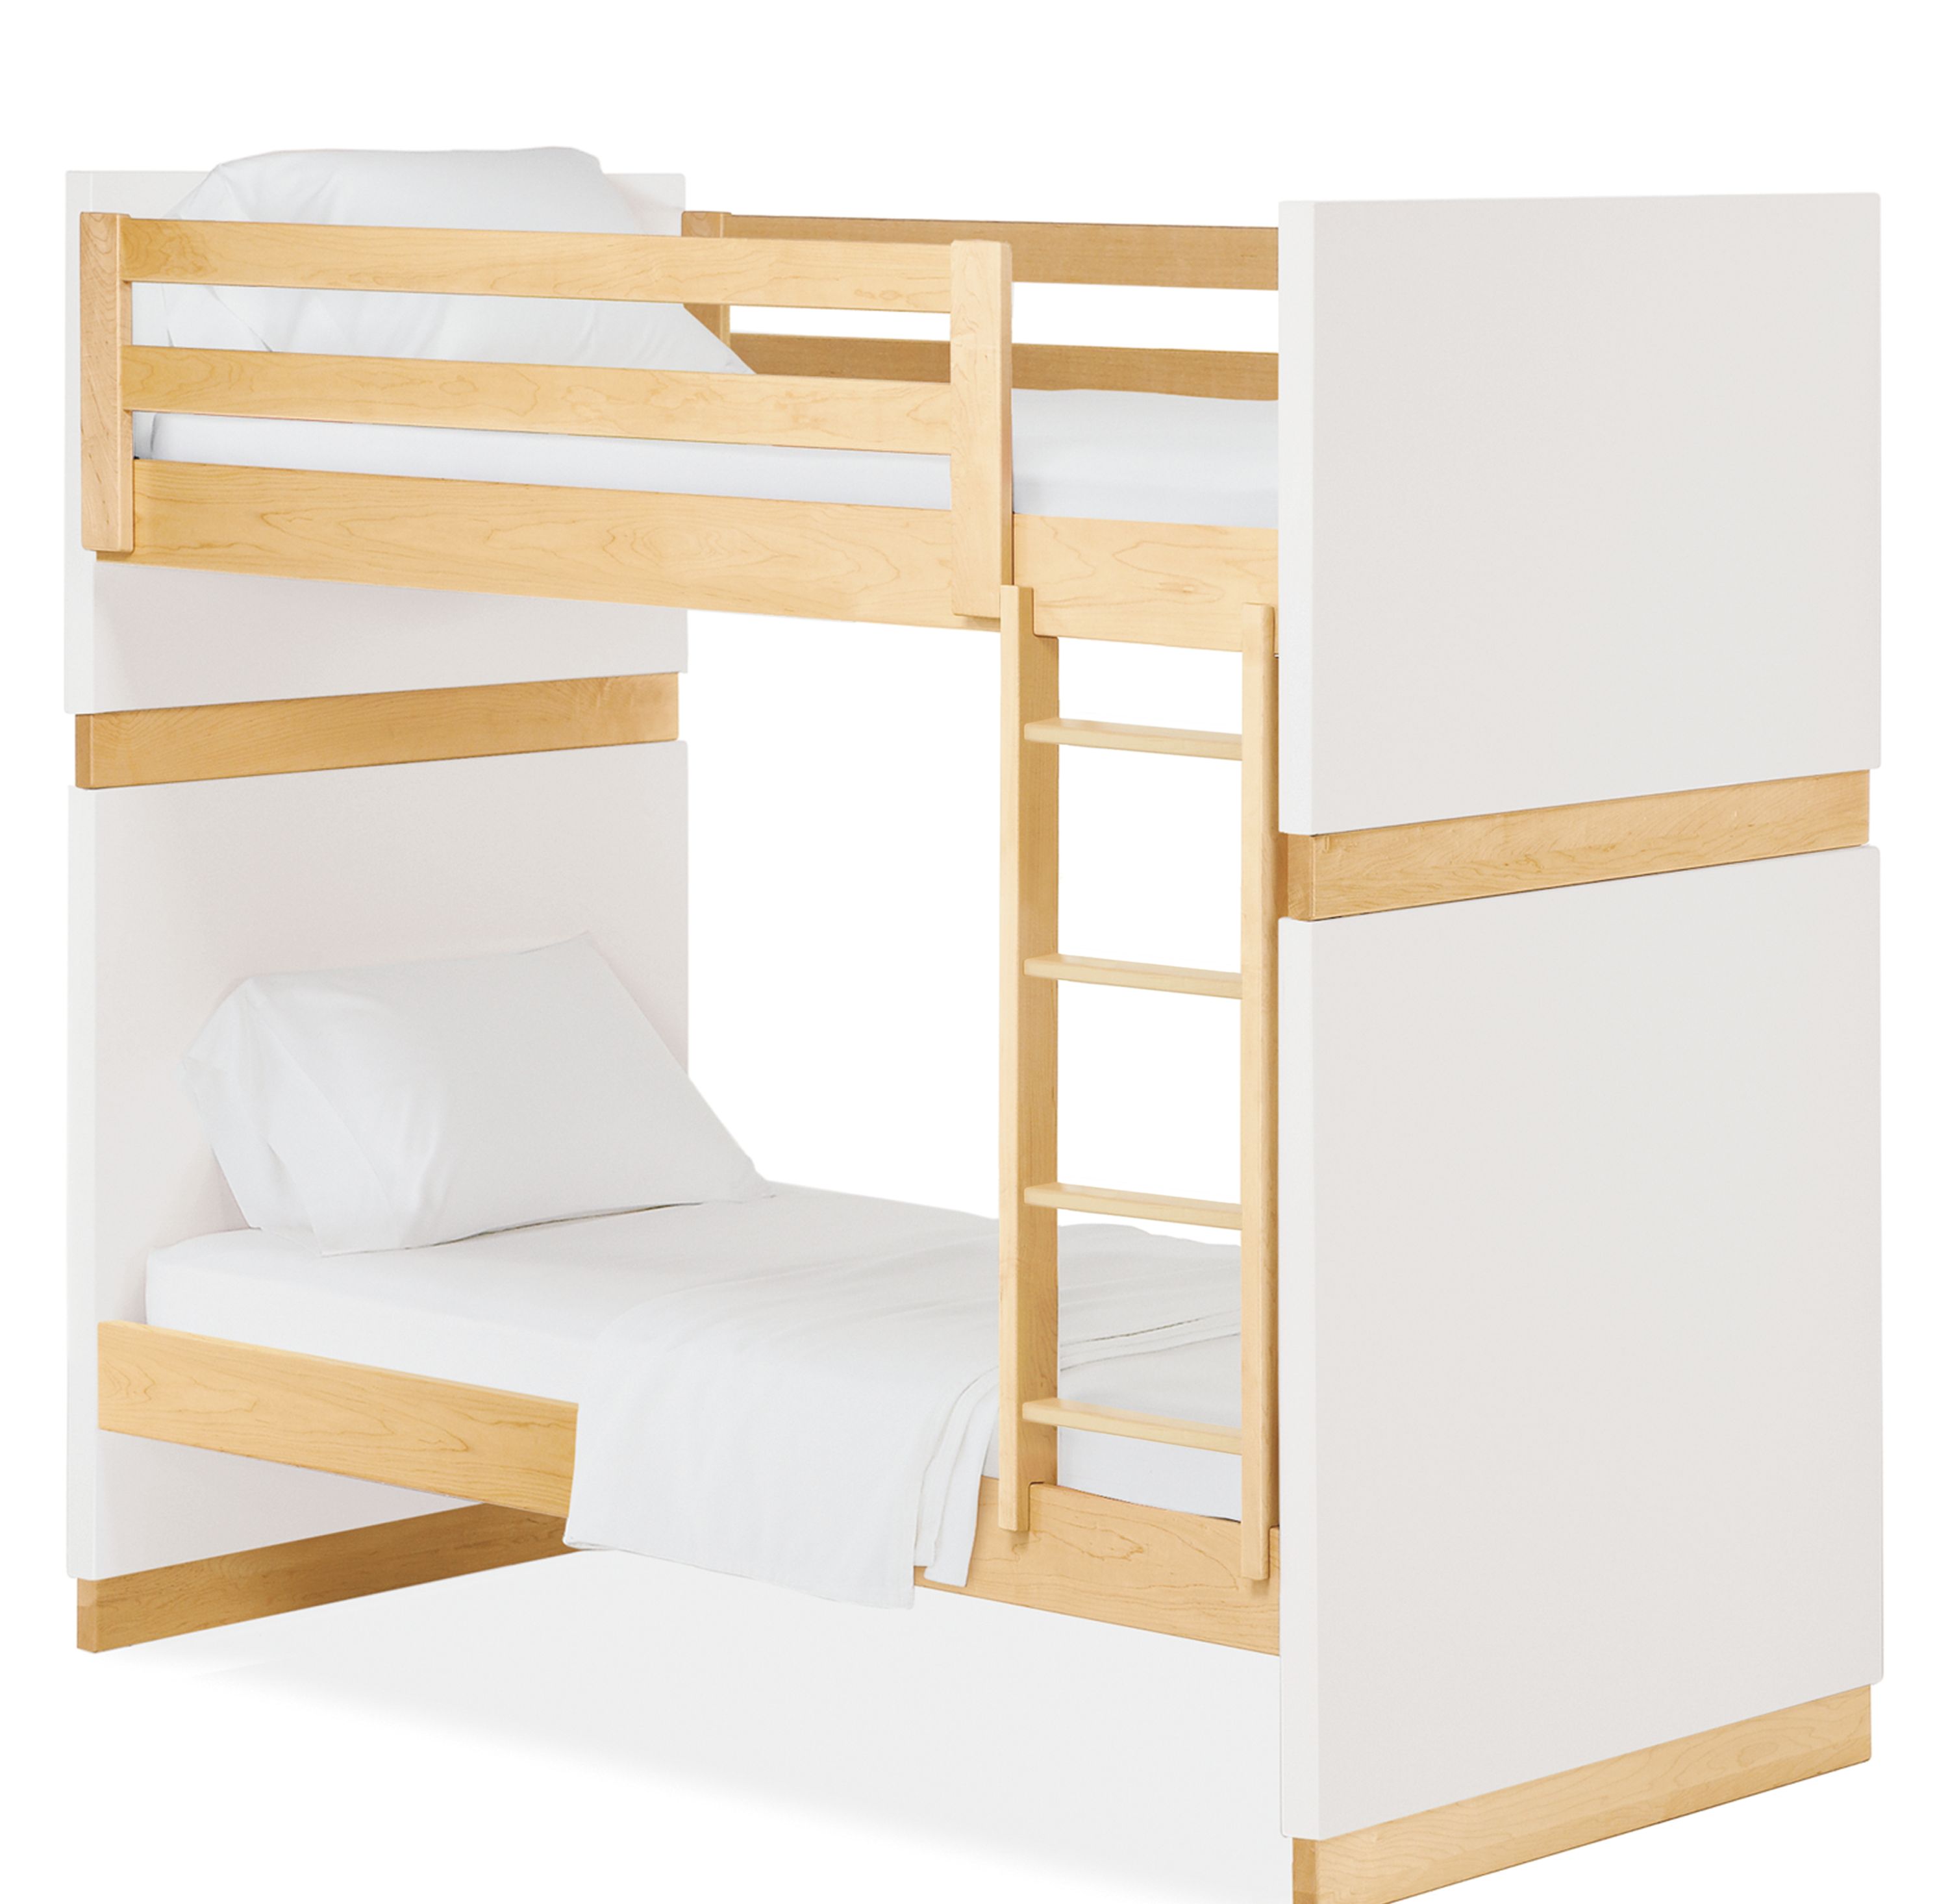 Moda Bunk Beds Twin Over, Full Loft Bed Frame Wood